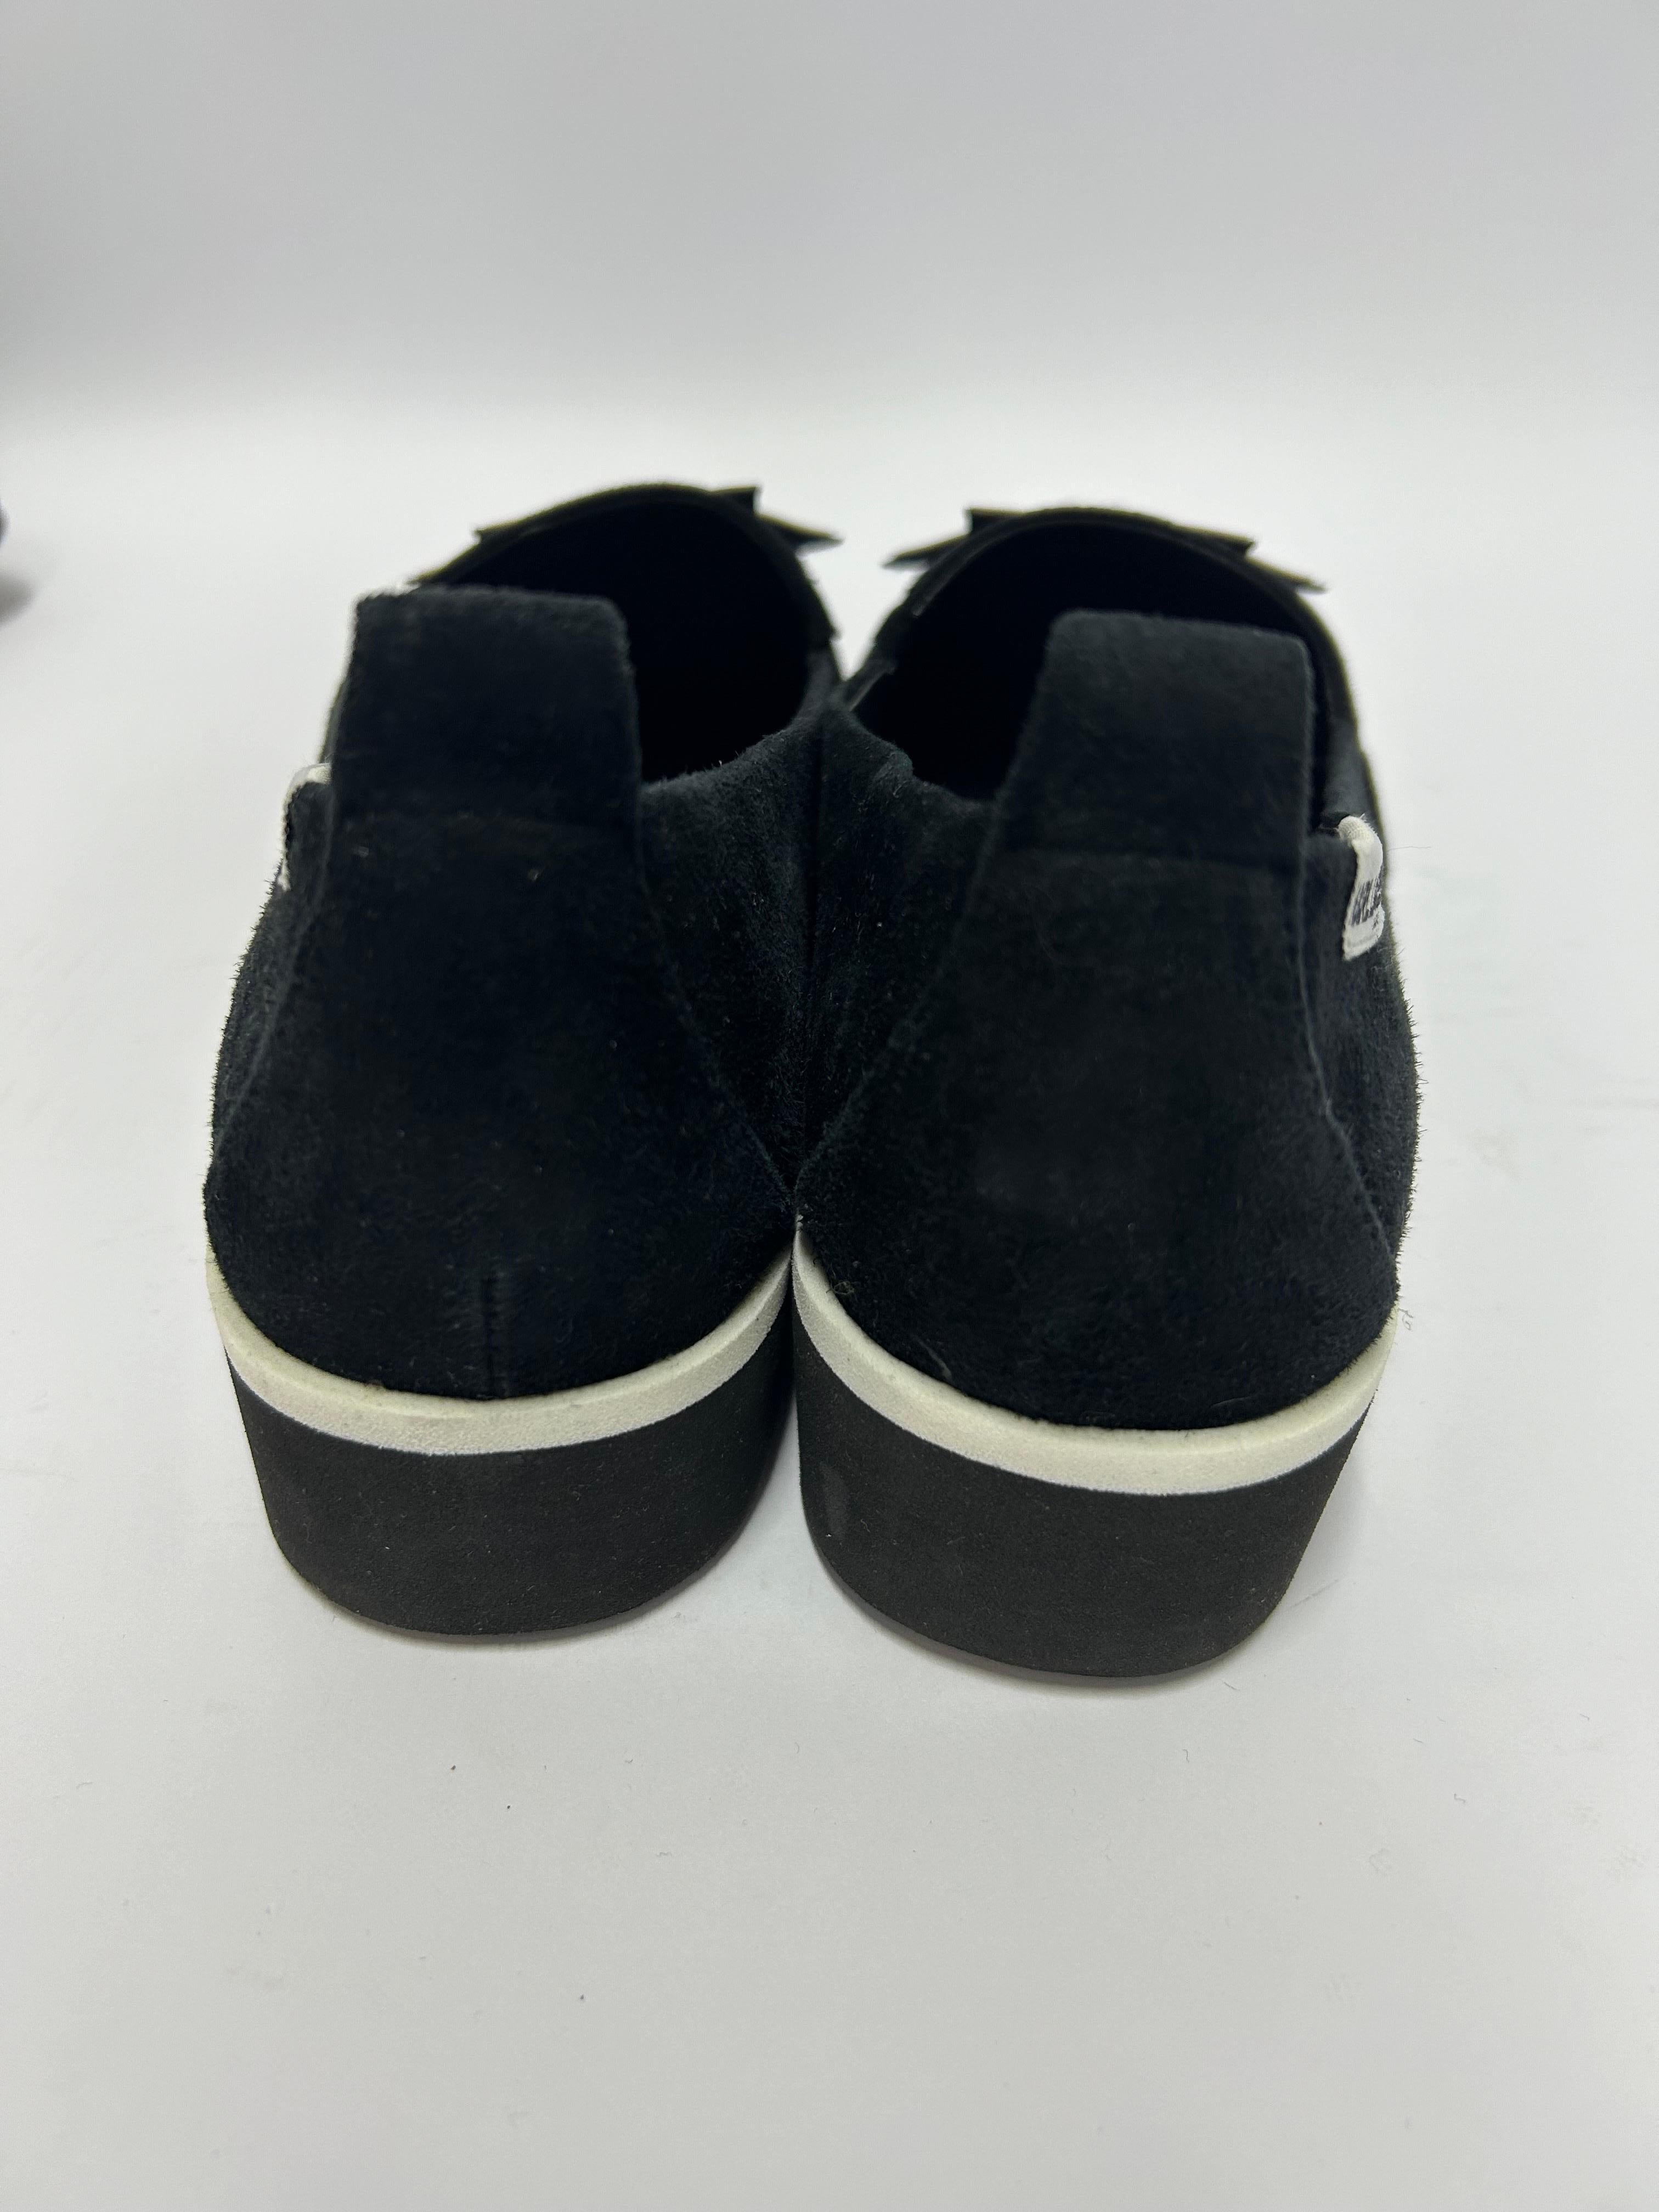 Karl Lagerfeld Paris Carma Sneakers Size US 7.5 For Sale 4